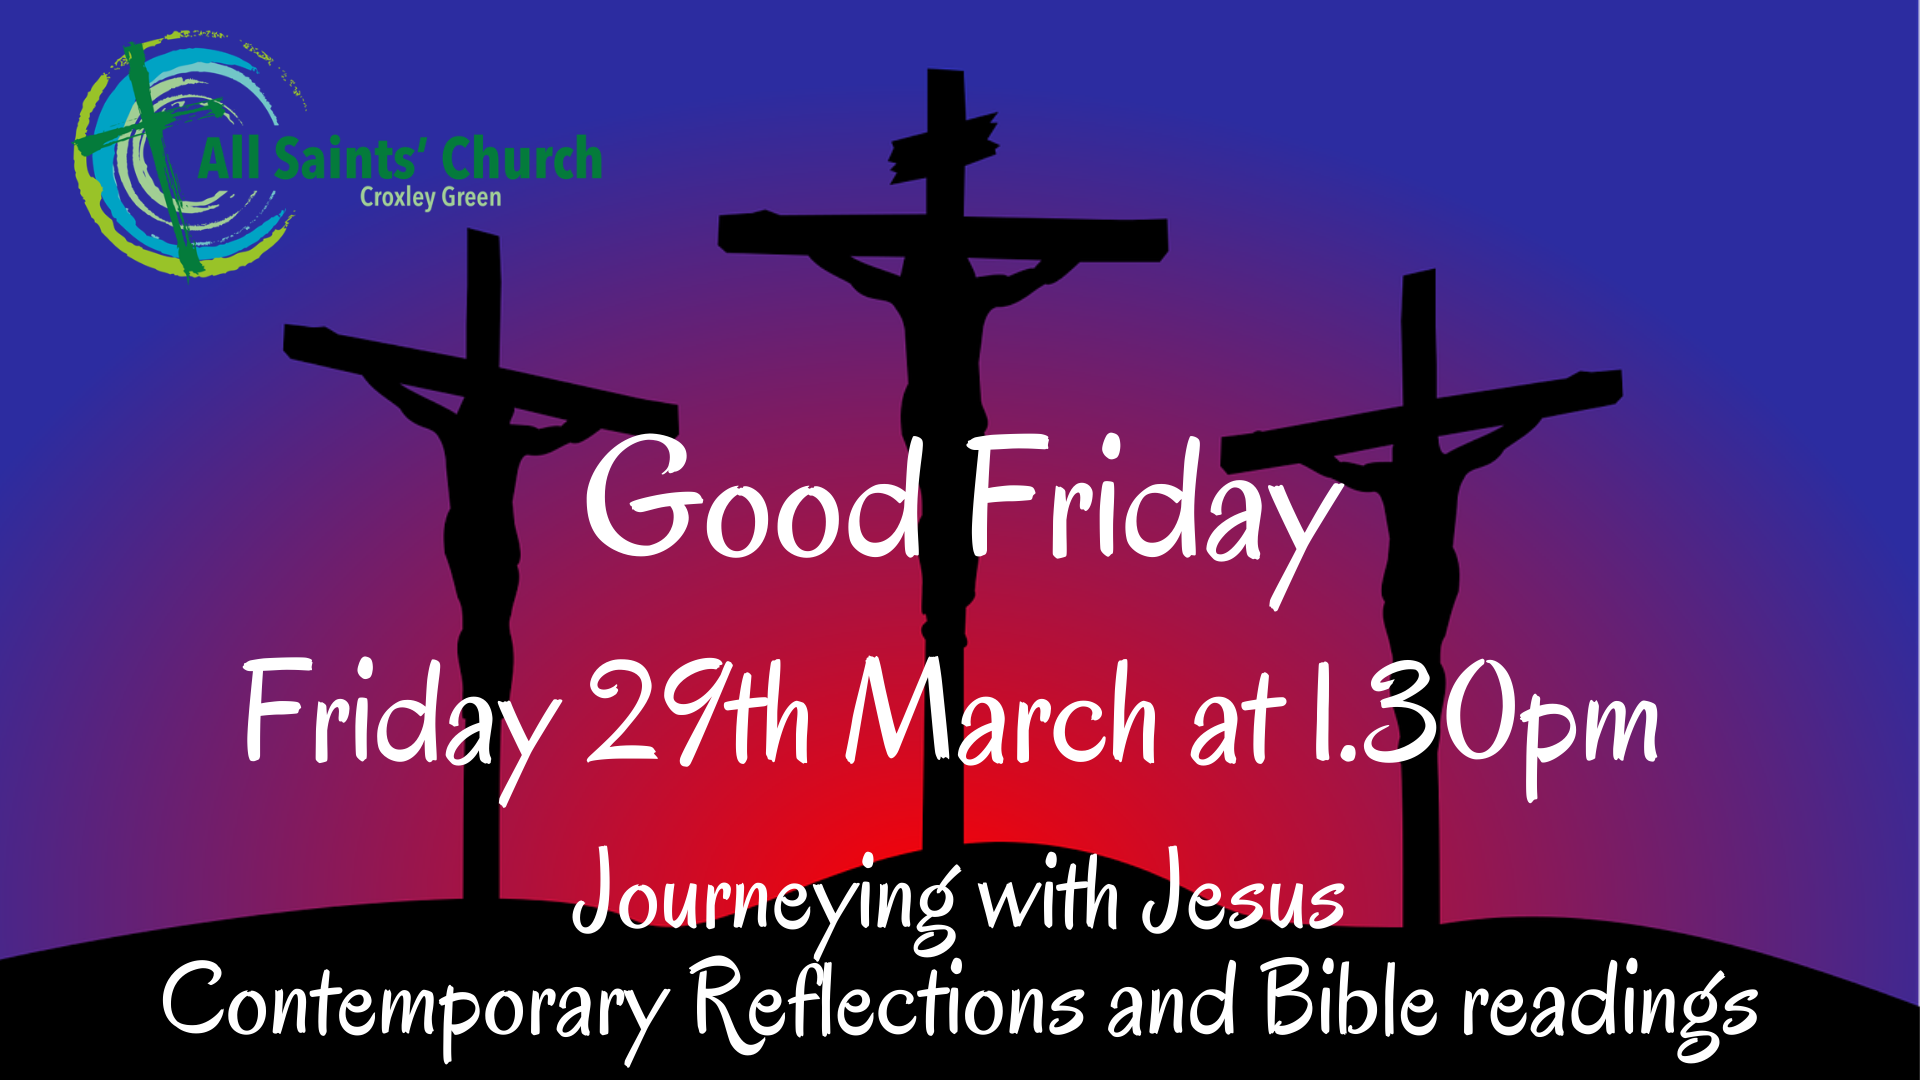 Good Friday - Guided Reflection